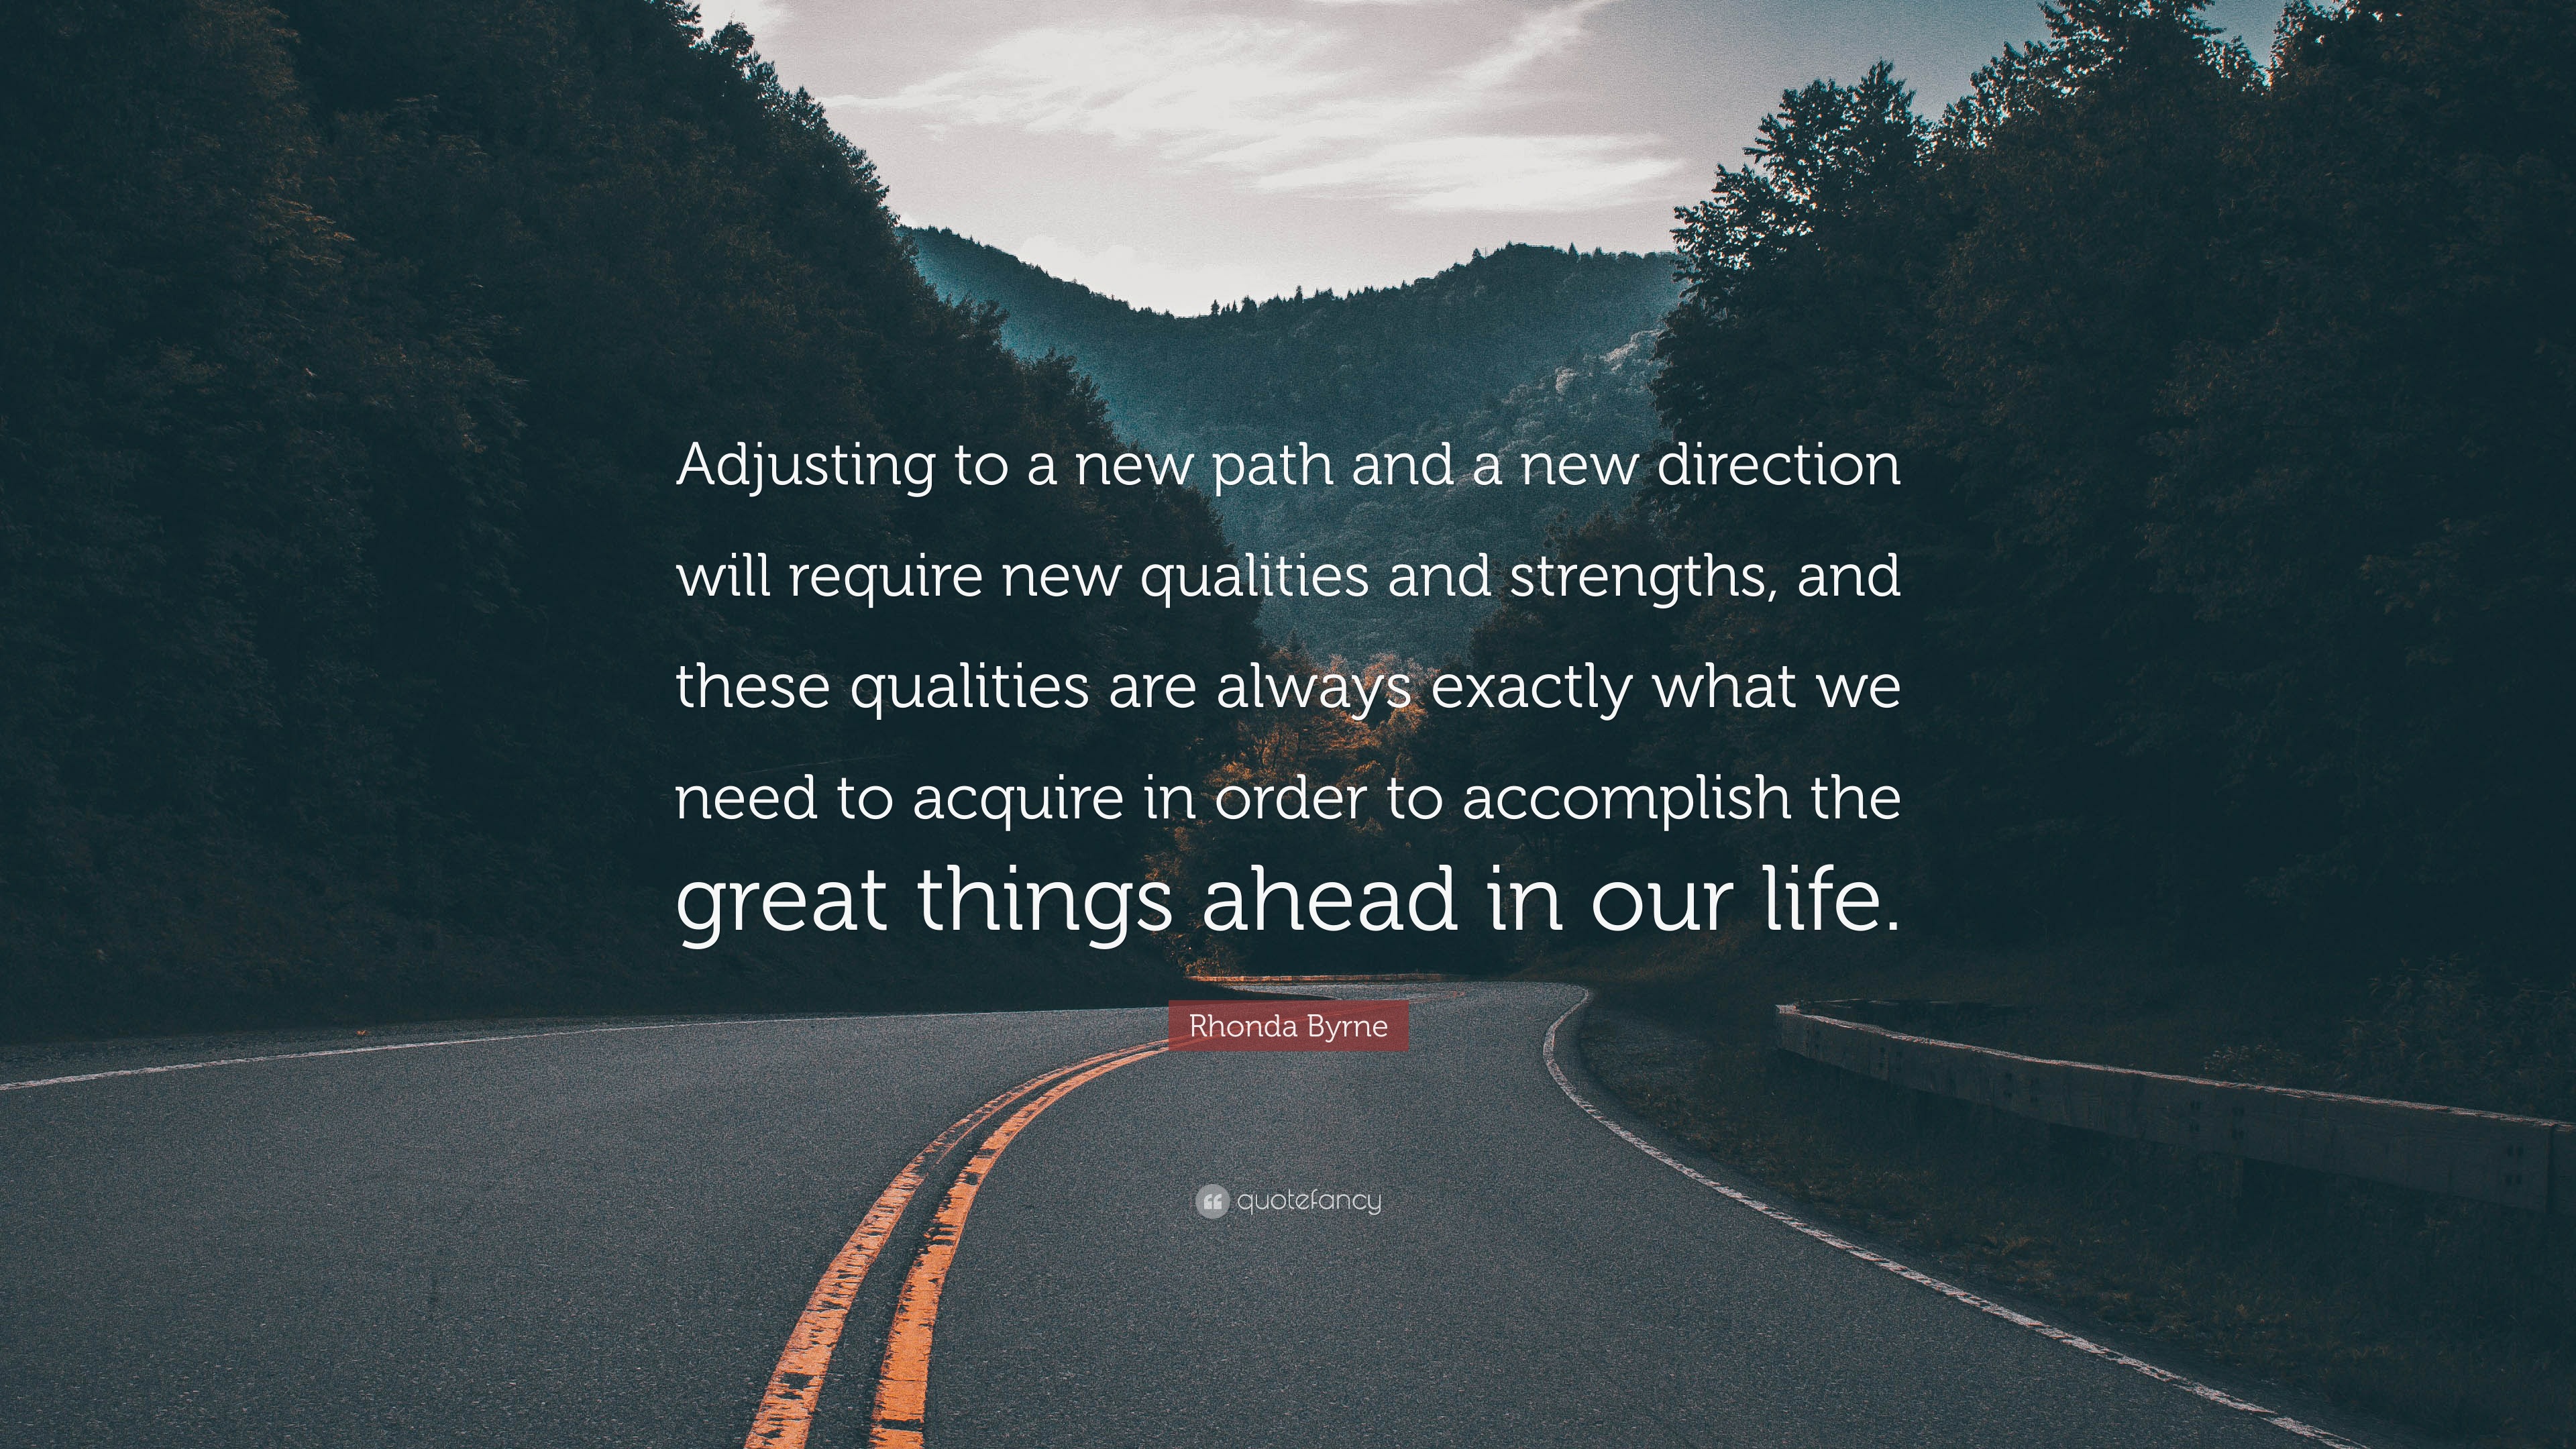 Rhonda Byrne Quote “Adjusting to a new path and a new direction will require